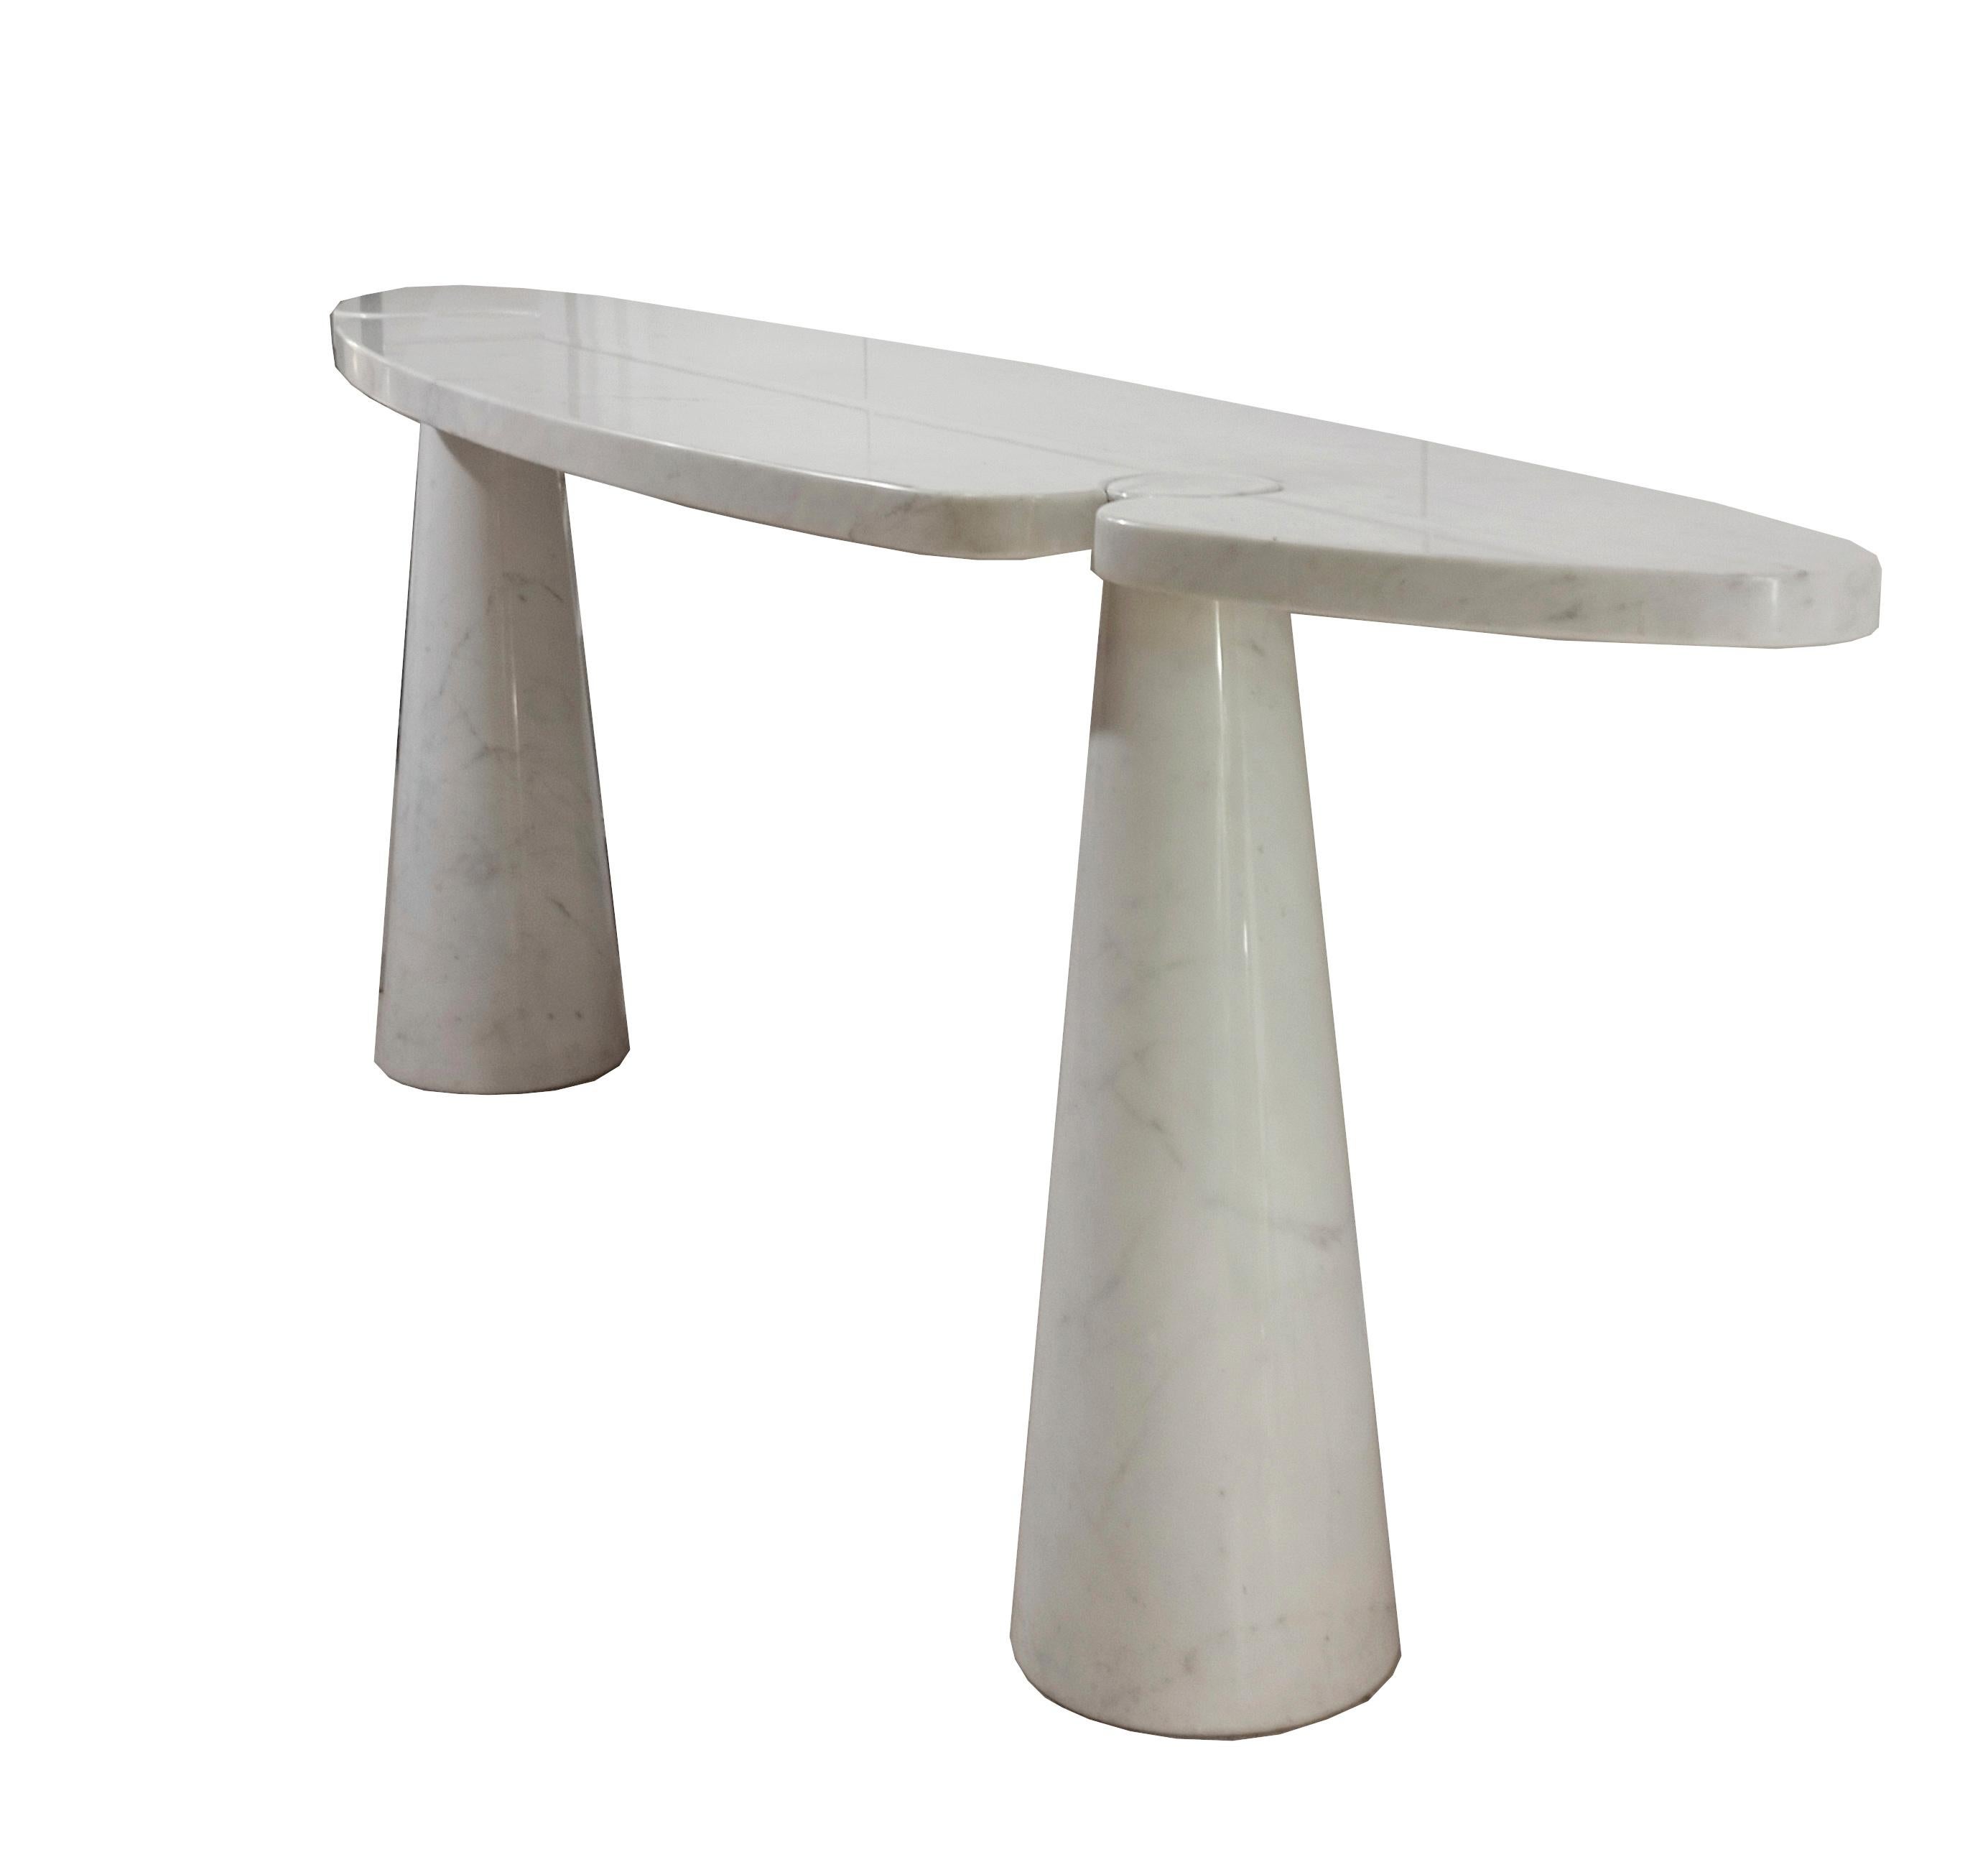 This rare and original white marble Eros table is from the first edition designed by Italian architect and designer Angelo Mangiarotti and produced by Sipper in 1971. 
Since then there have been a few re-editions, but none of these re-editions, let